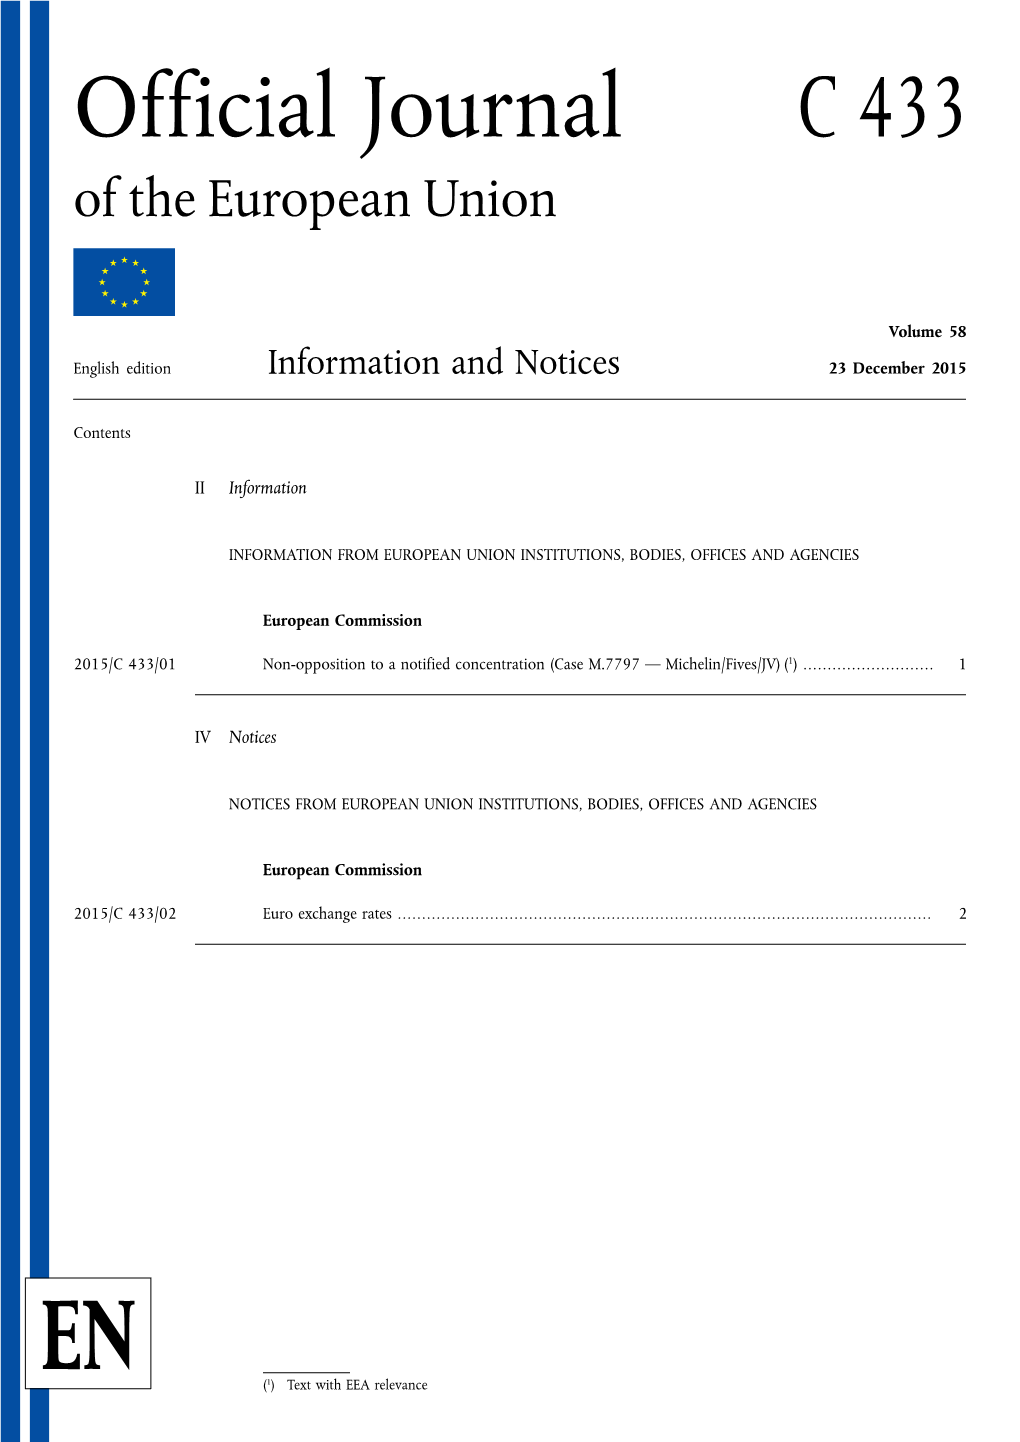 Official Journal C 433 of the European Union